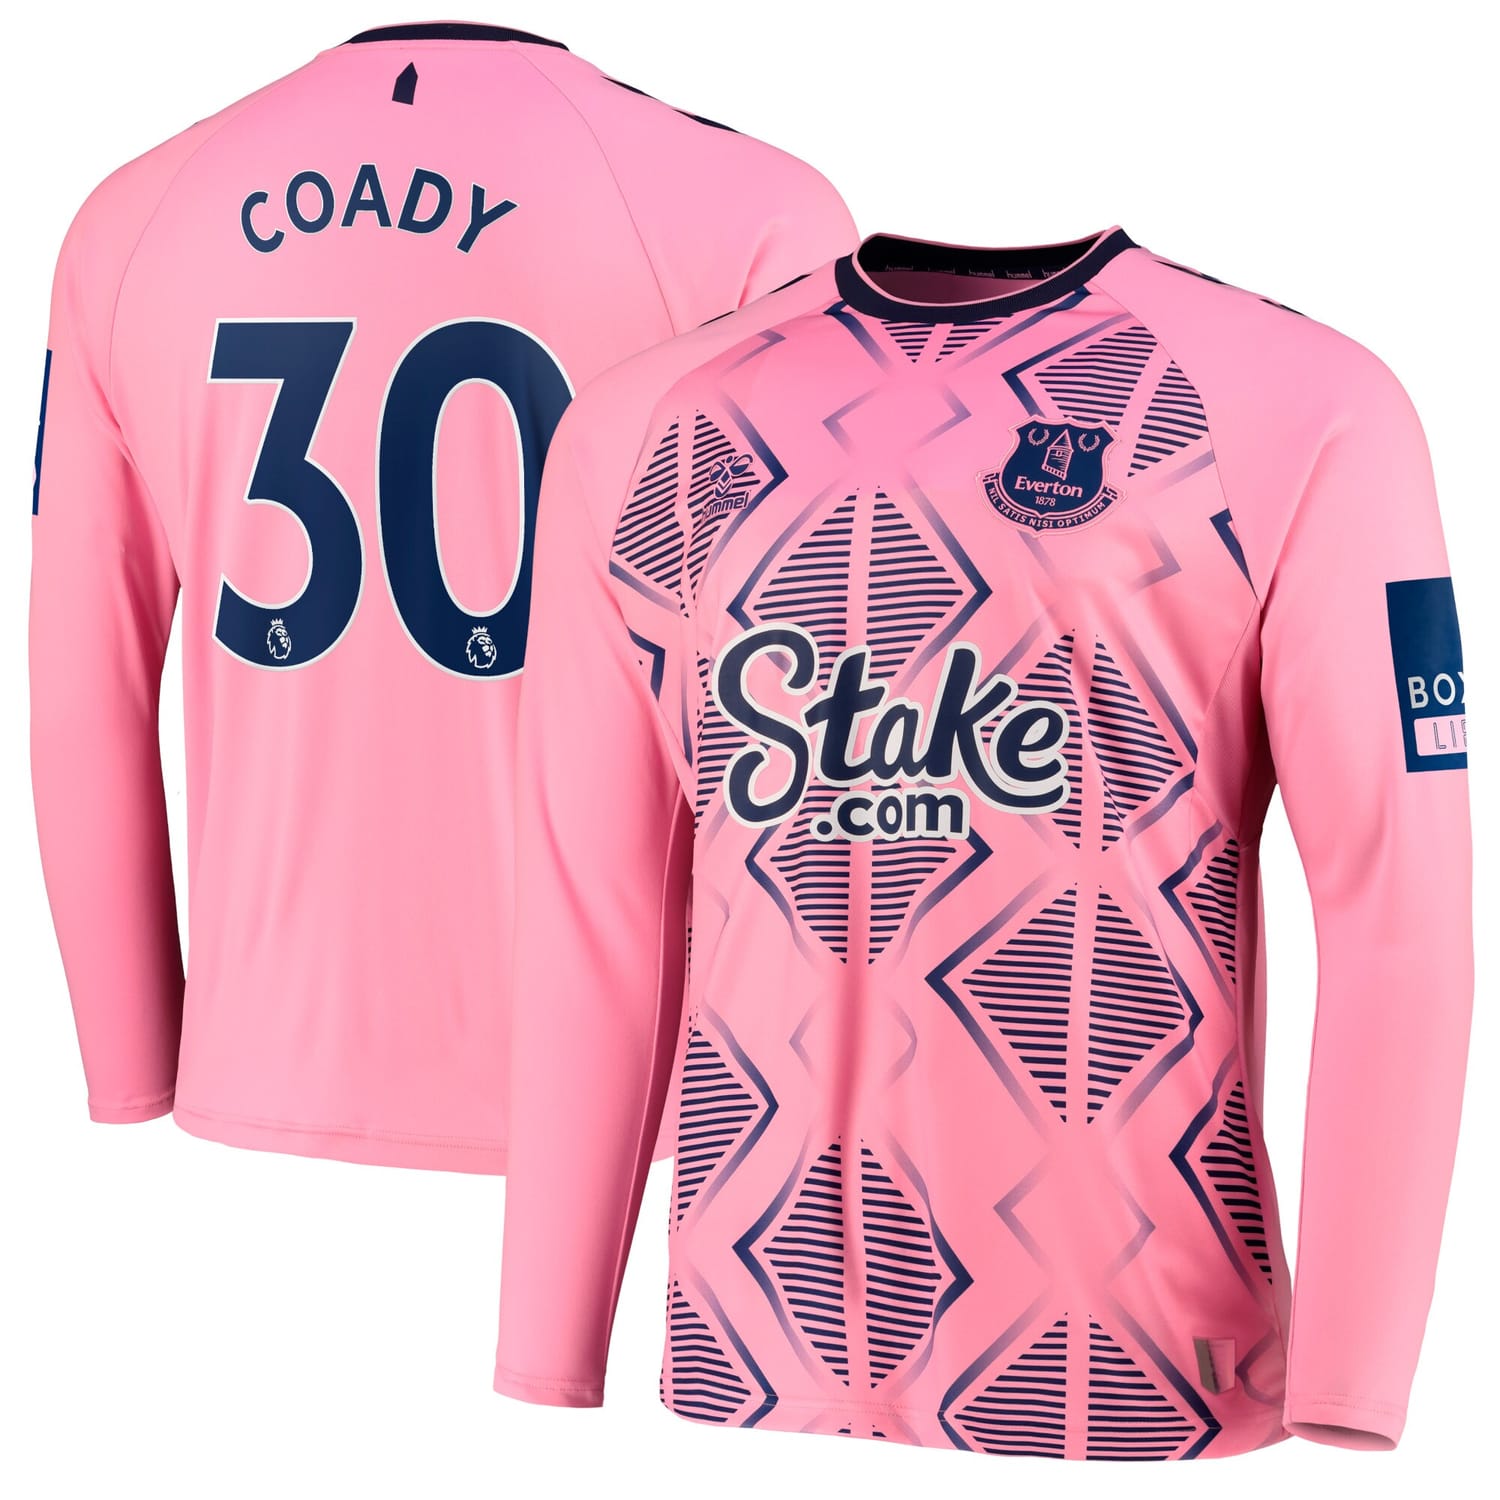 Premier League Everton Away Jersey Shirt Long Sleeve 2022-23 player Conor Coady 30 printing for Men